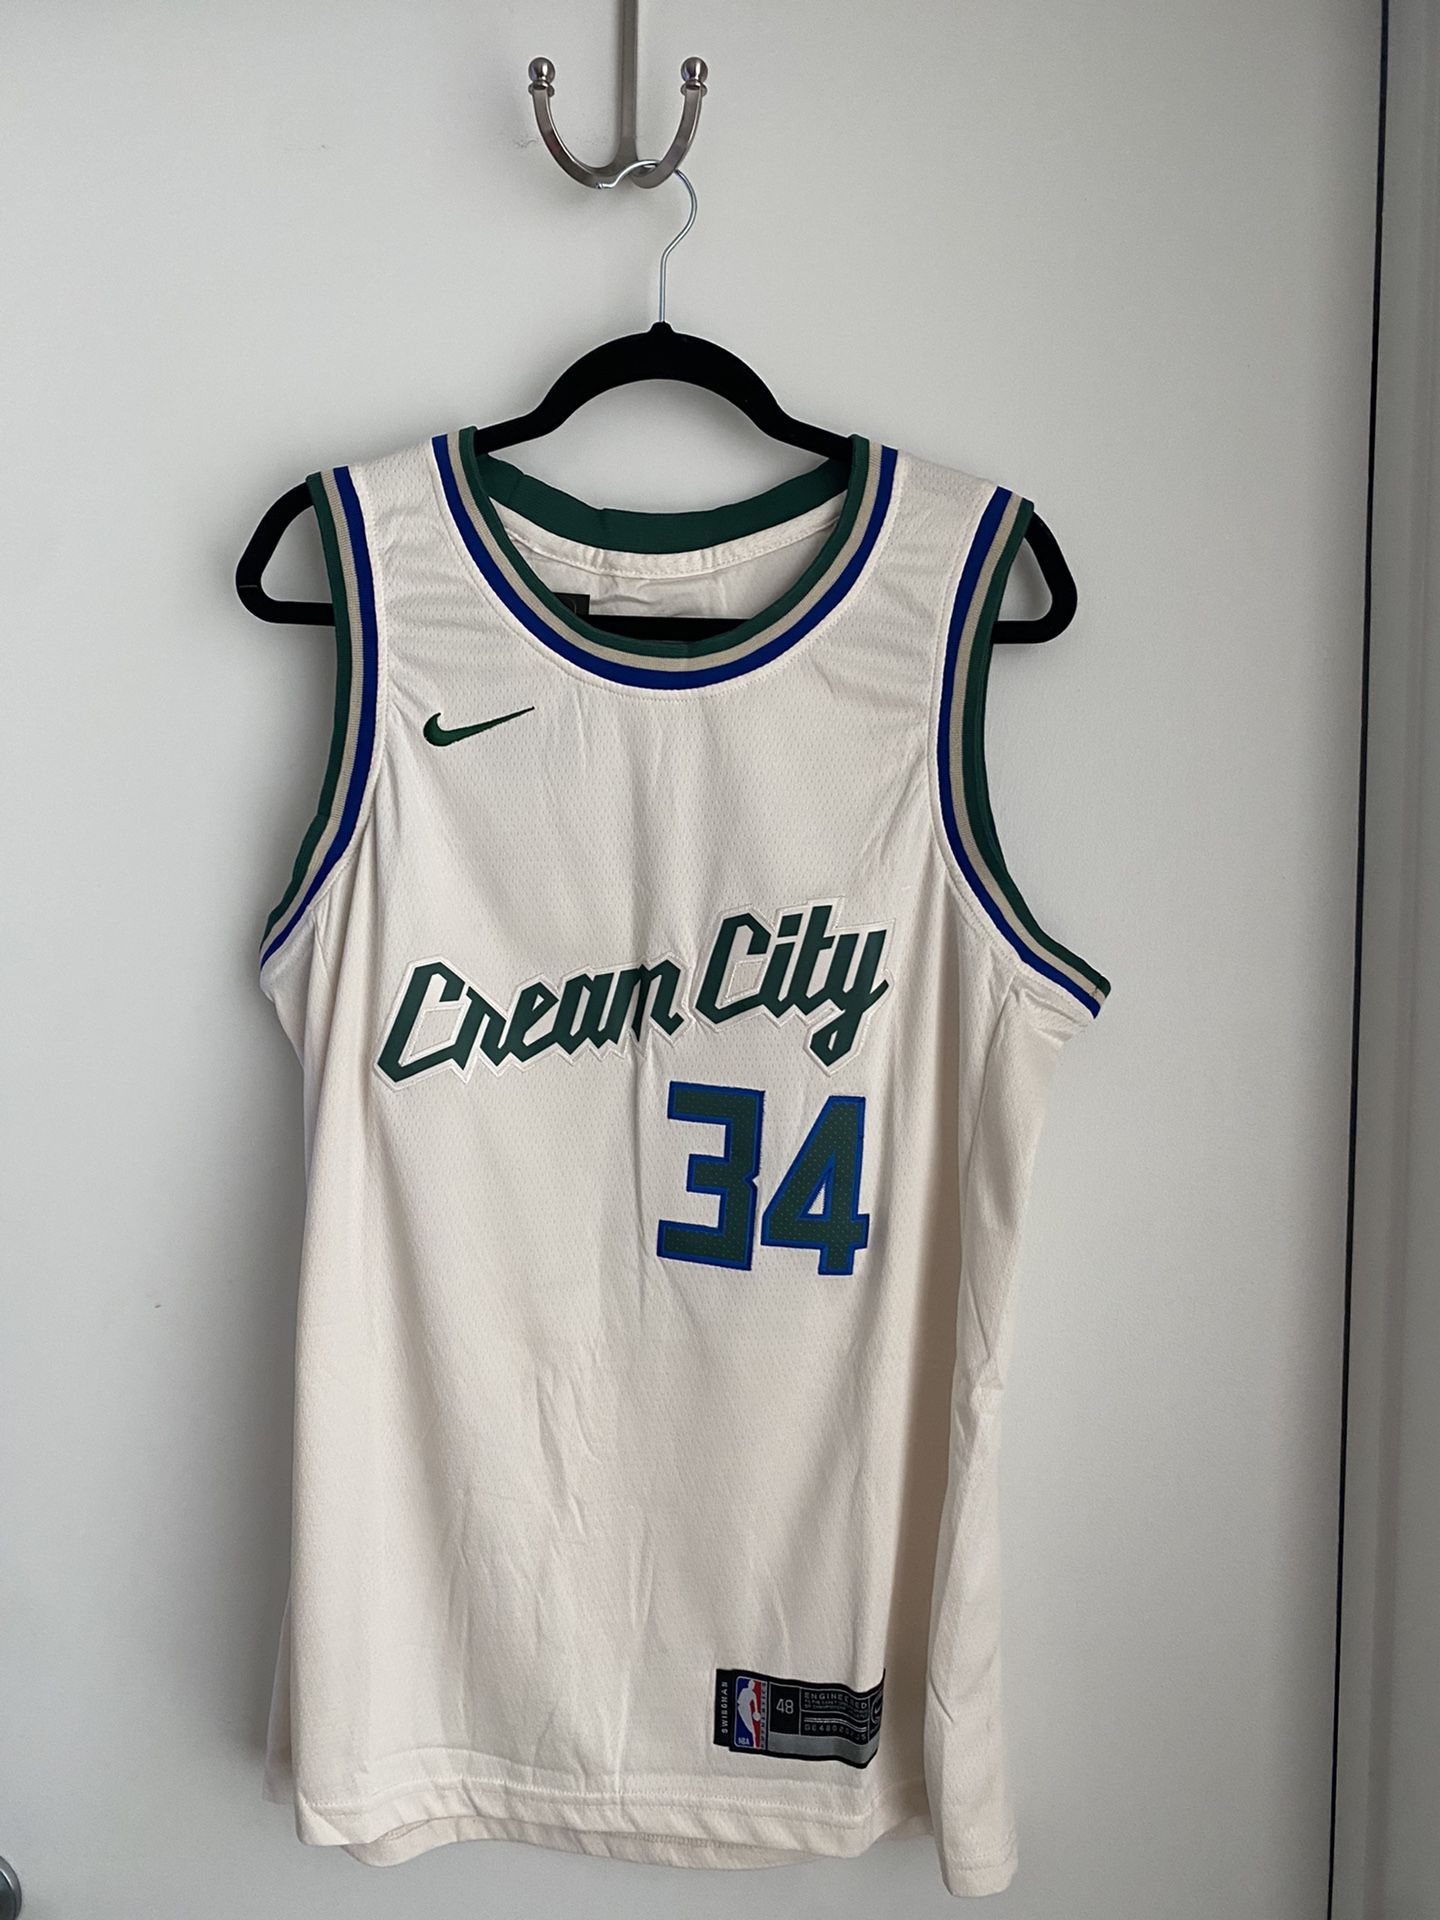 cream city jersey for sale